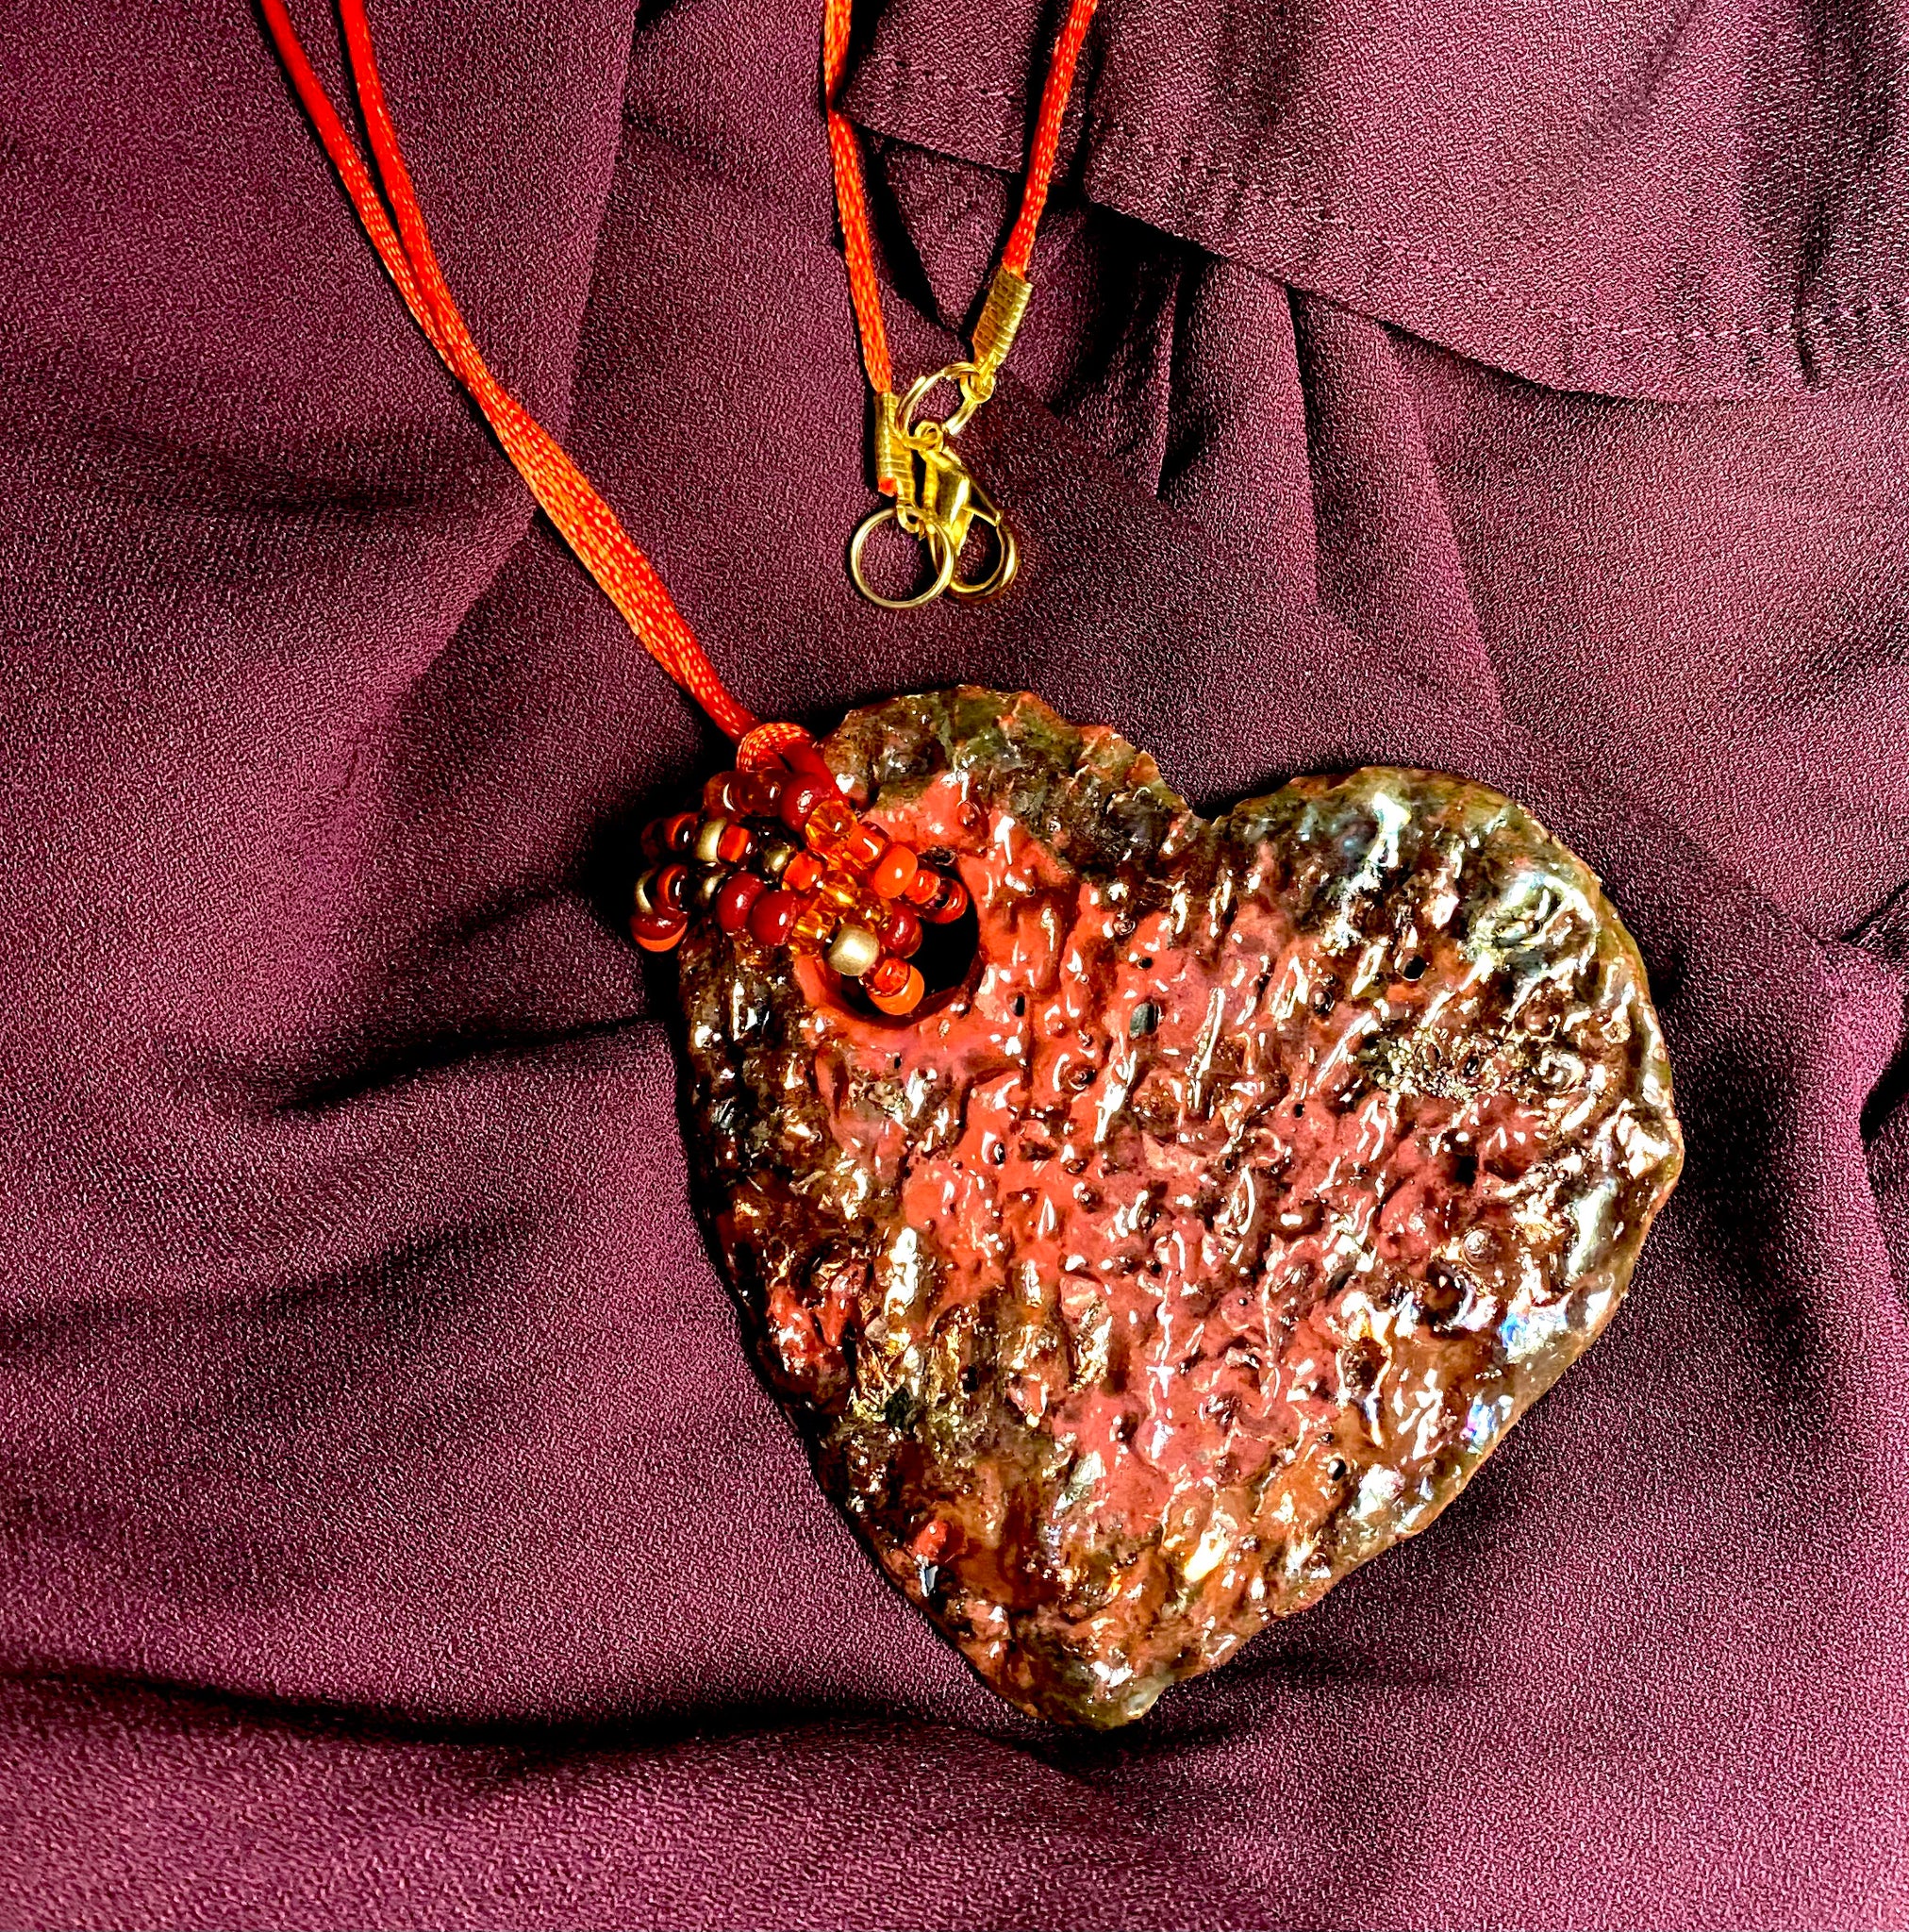 Have A Heart! Each heart pendant is handmade with love! It is 3"x 3" and weighs approx. 3ozs. This pendant has a red violet and gold metallic raku glazes that renders a unique translucent  patina. The heart has a textured pattern . Both sides are  are different and equally beautiful! It holds a spiral of red mini beads on a spiral copper wire. This pendant has a nice 12" red rattail cord!